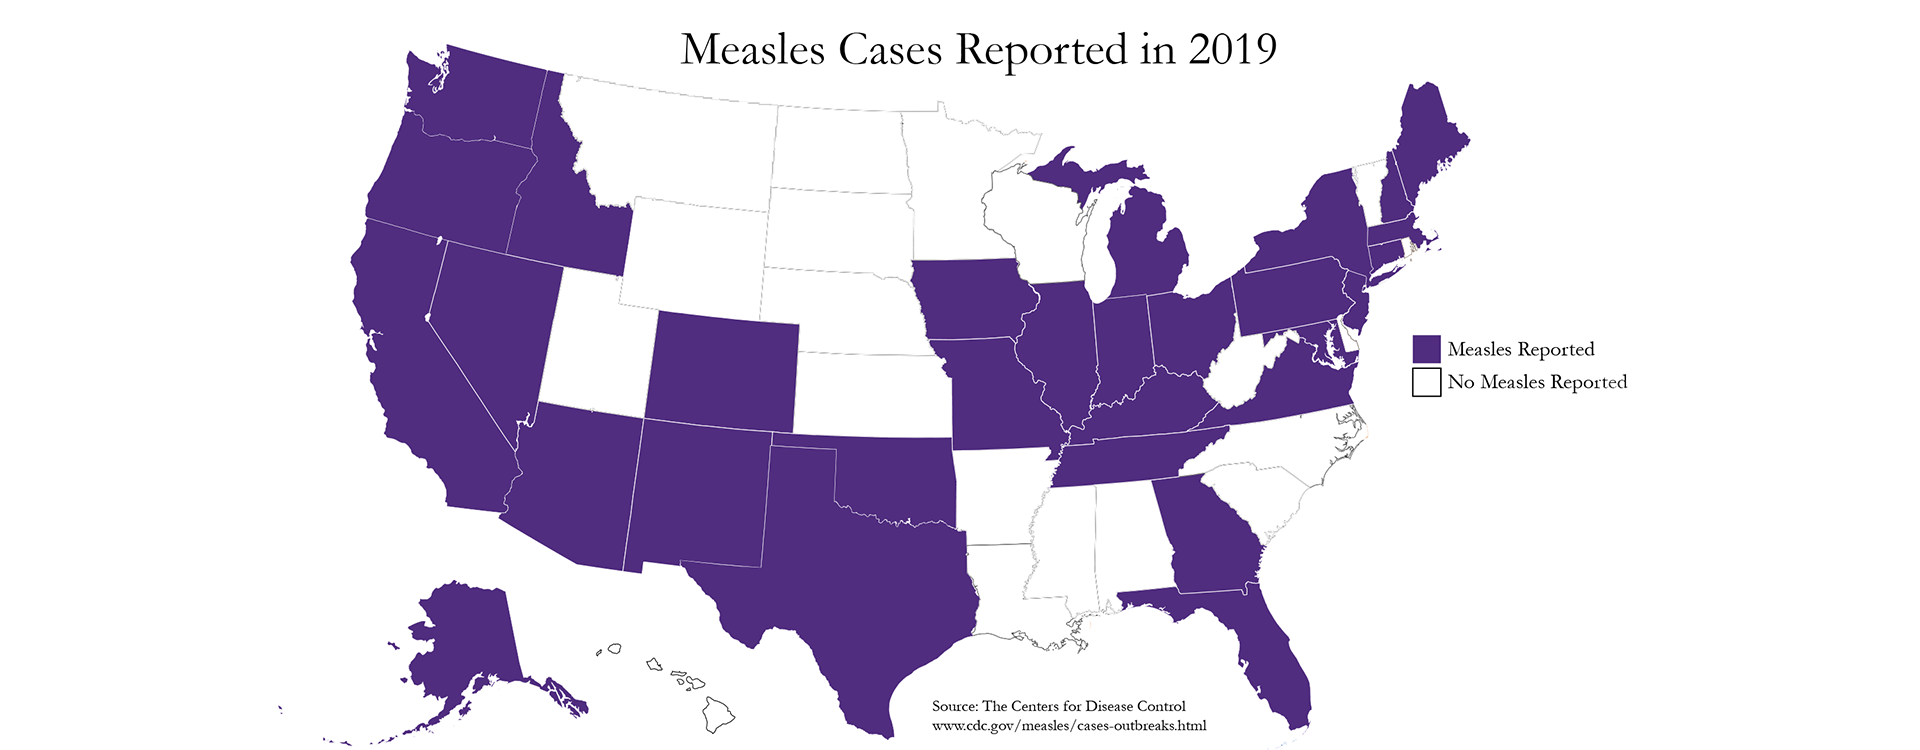 According to the Centers for Disease Control, measles have been reported in multiple states, including Virginia, Georgia, Florida, Tennessee, Kentucky, Texas, Californica and New York.